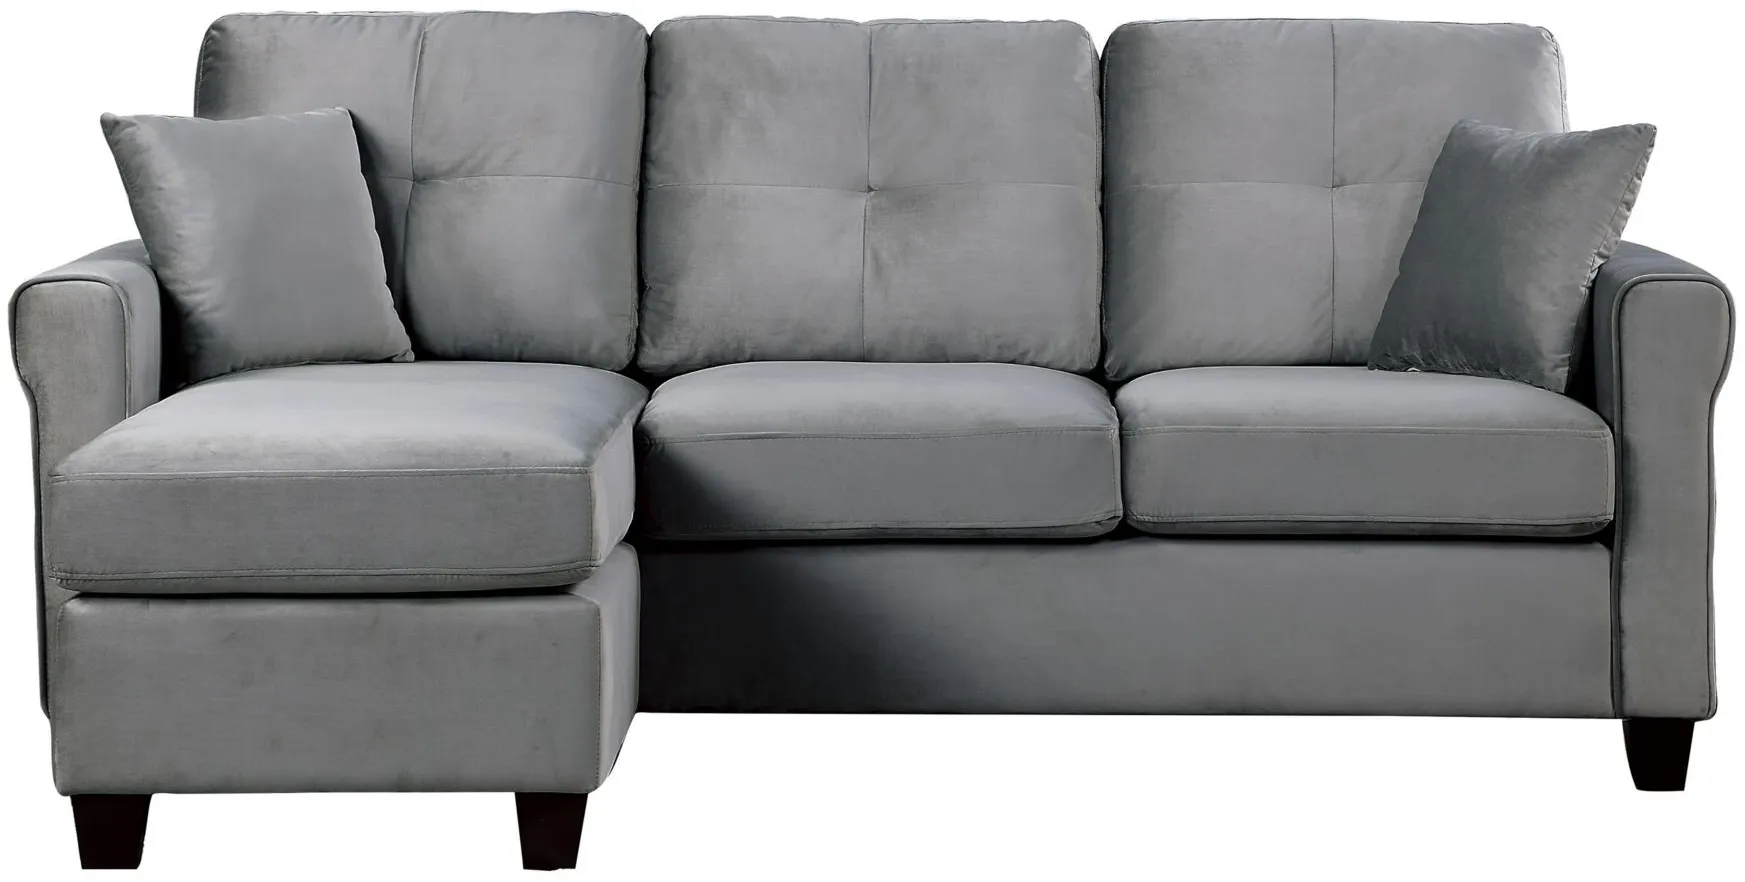 Grenadier 2-pc. Reversible Sectional Sofa in Gray by Homelegance